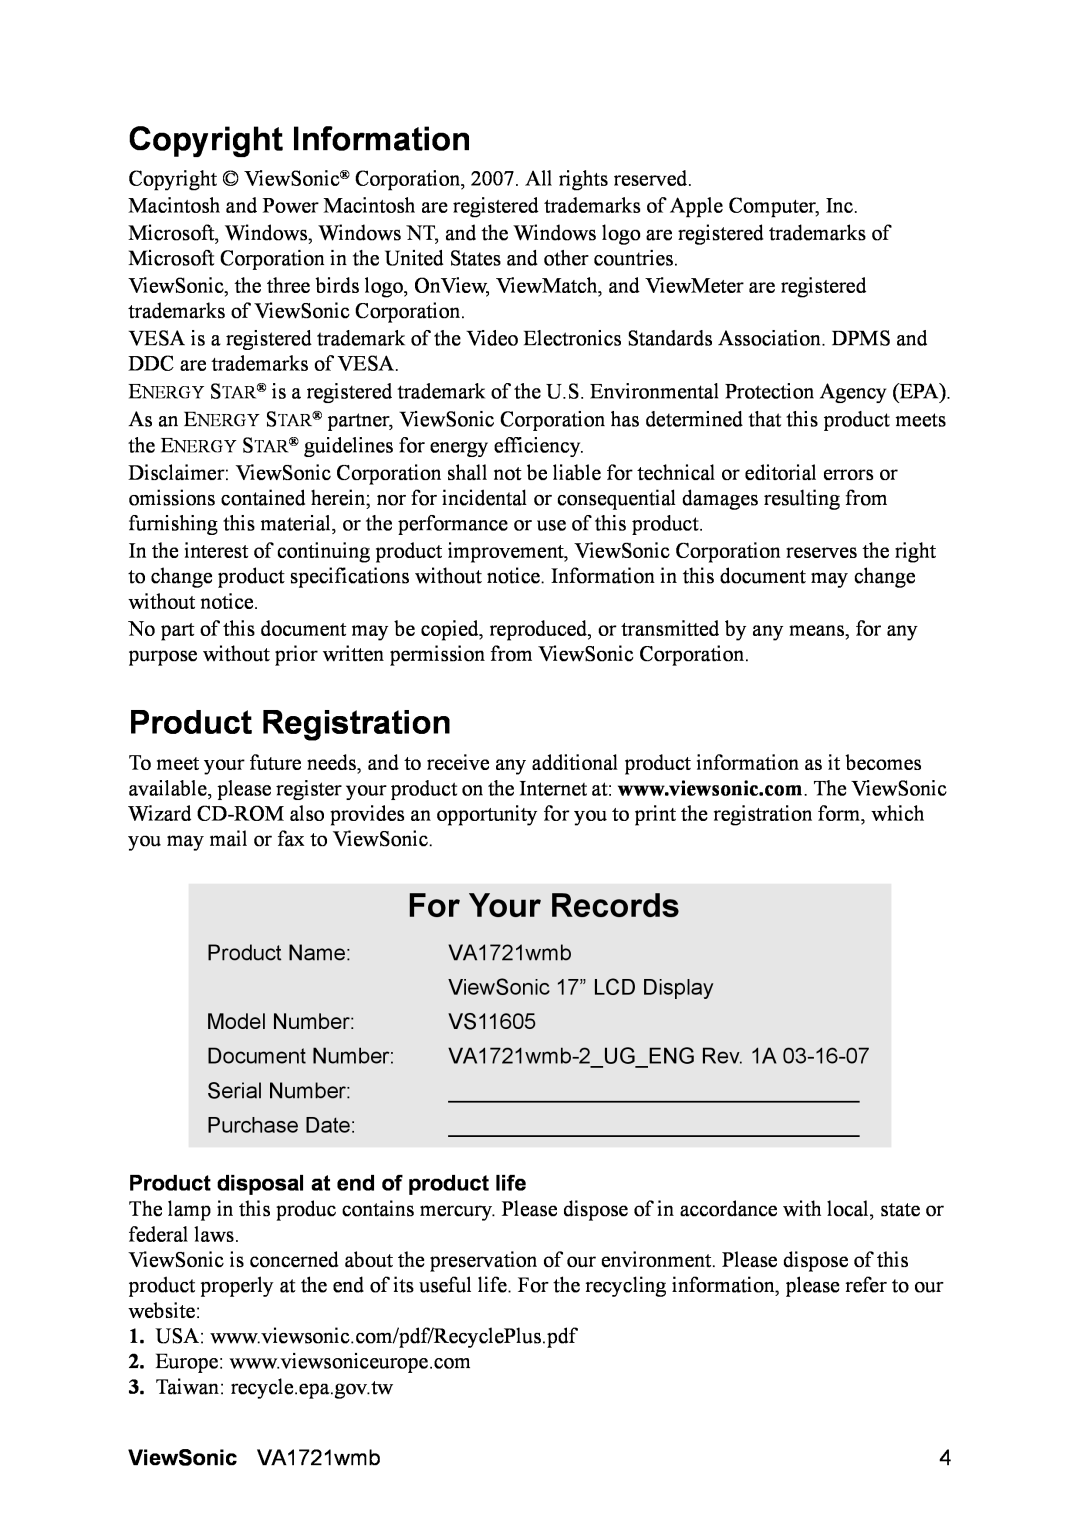 ViewSonic VS11605 Copyright Information, Product Registration, For Your Records, Product disposal at end of product life 